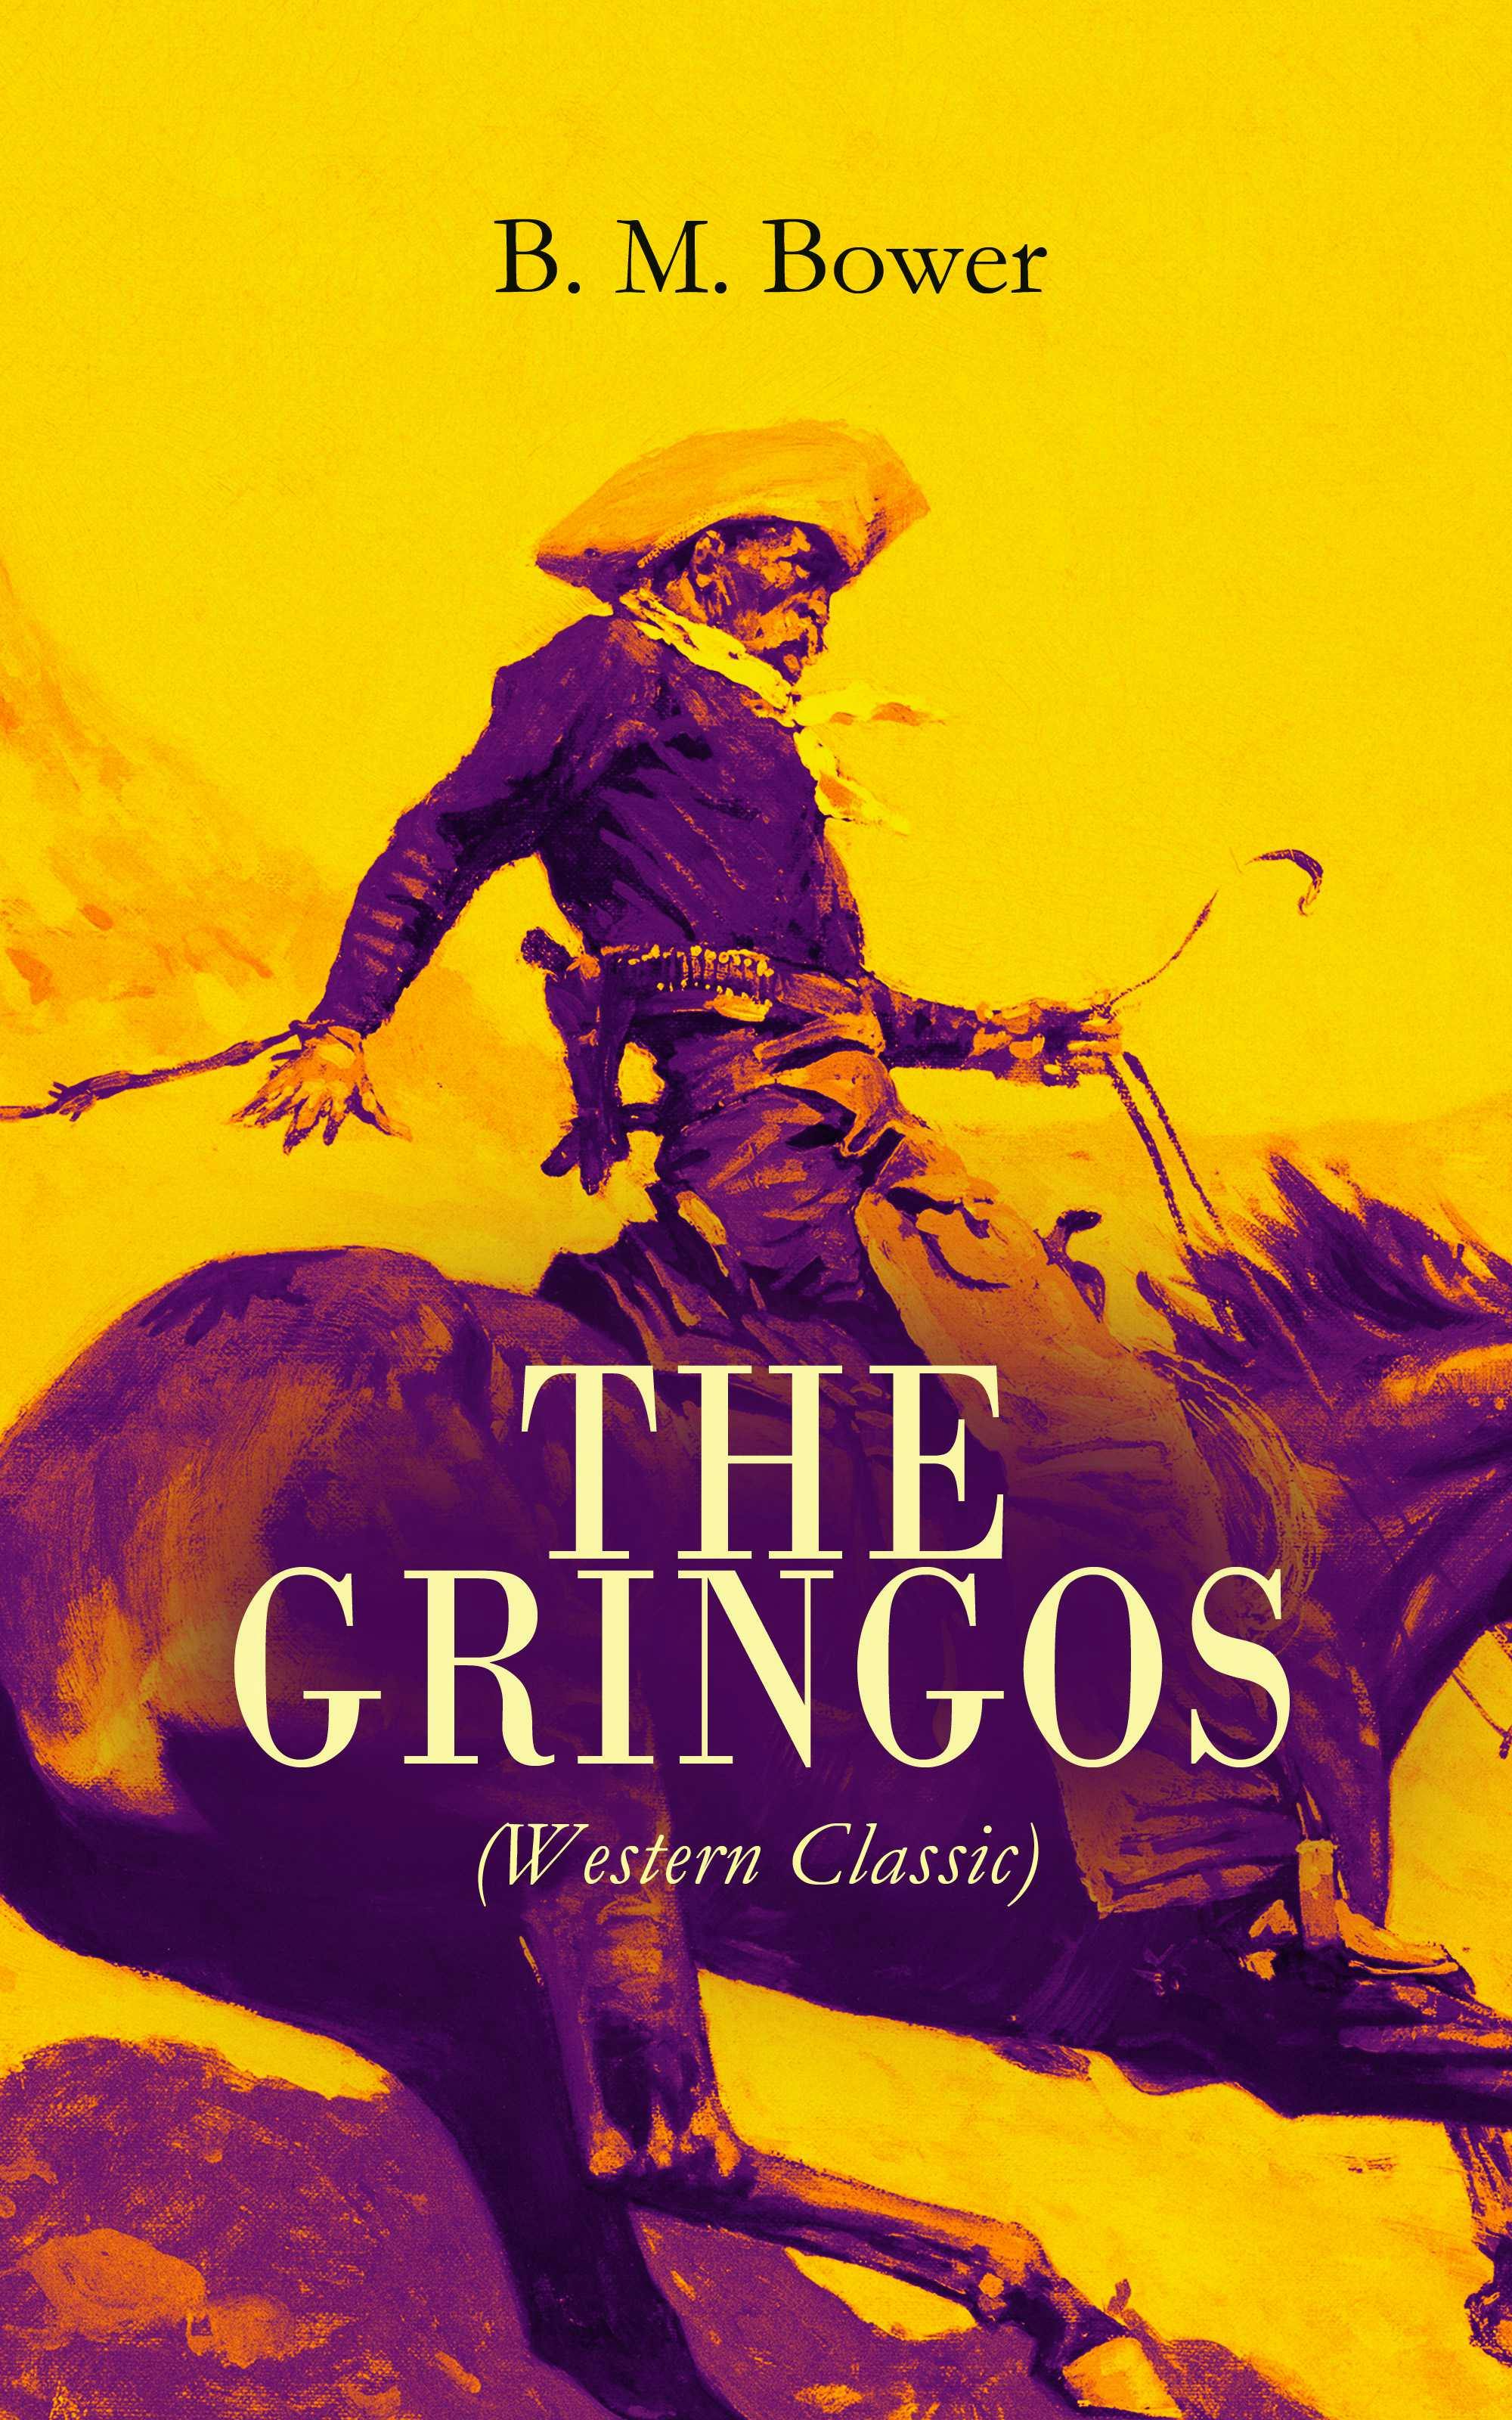 THE GRINGOS (Western Classic): The Tale of the California Gold Rush Days - B. M. Bower